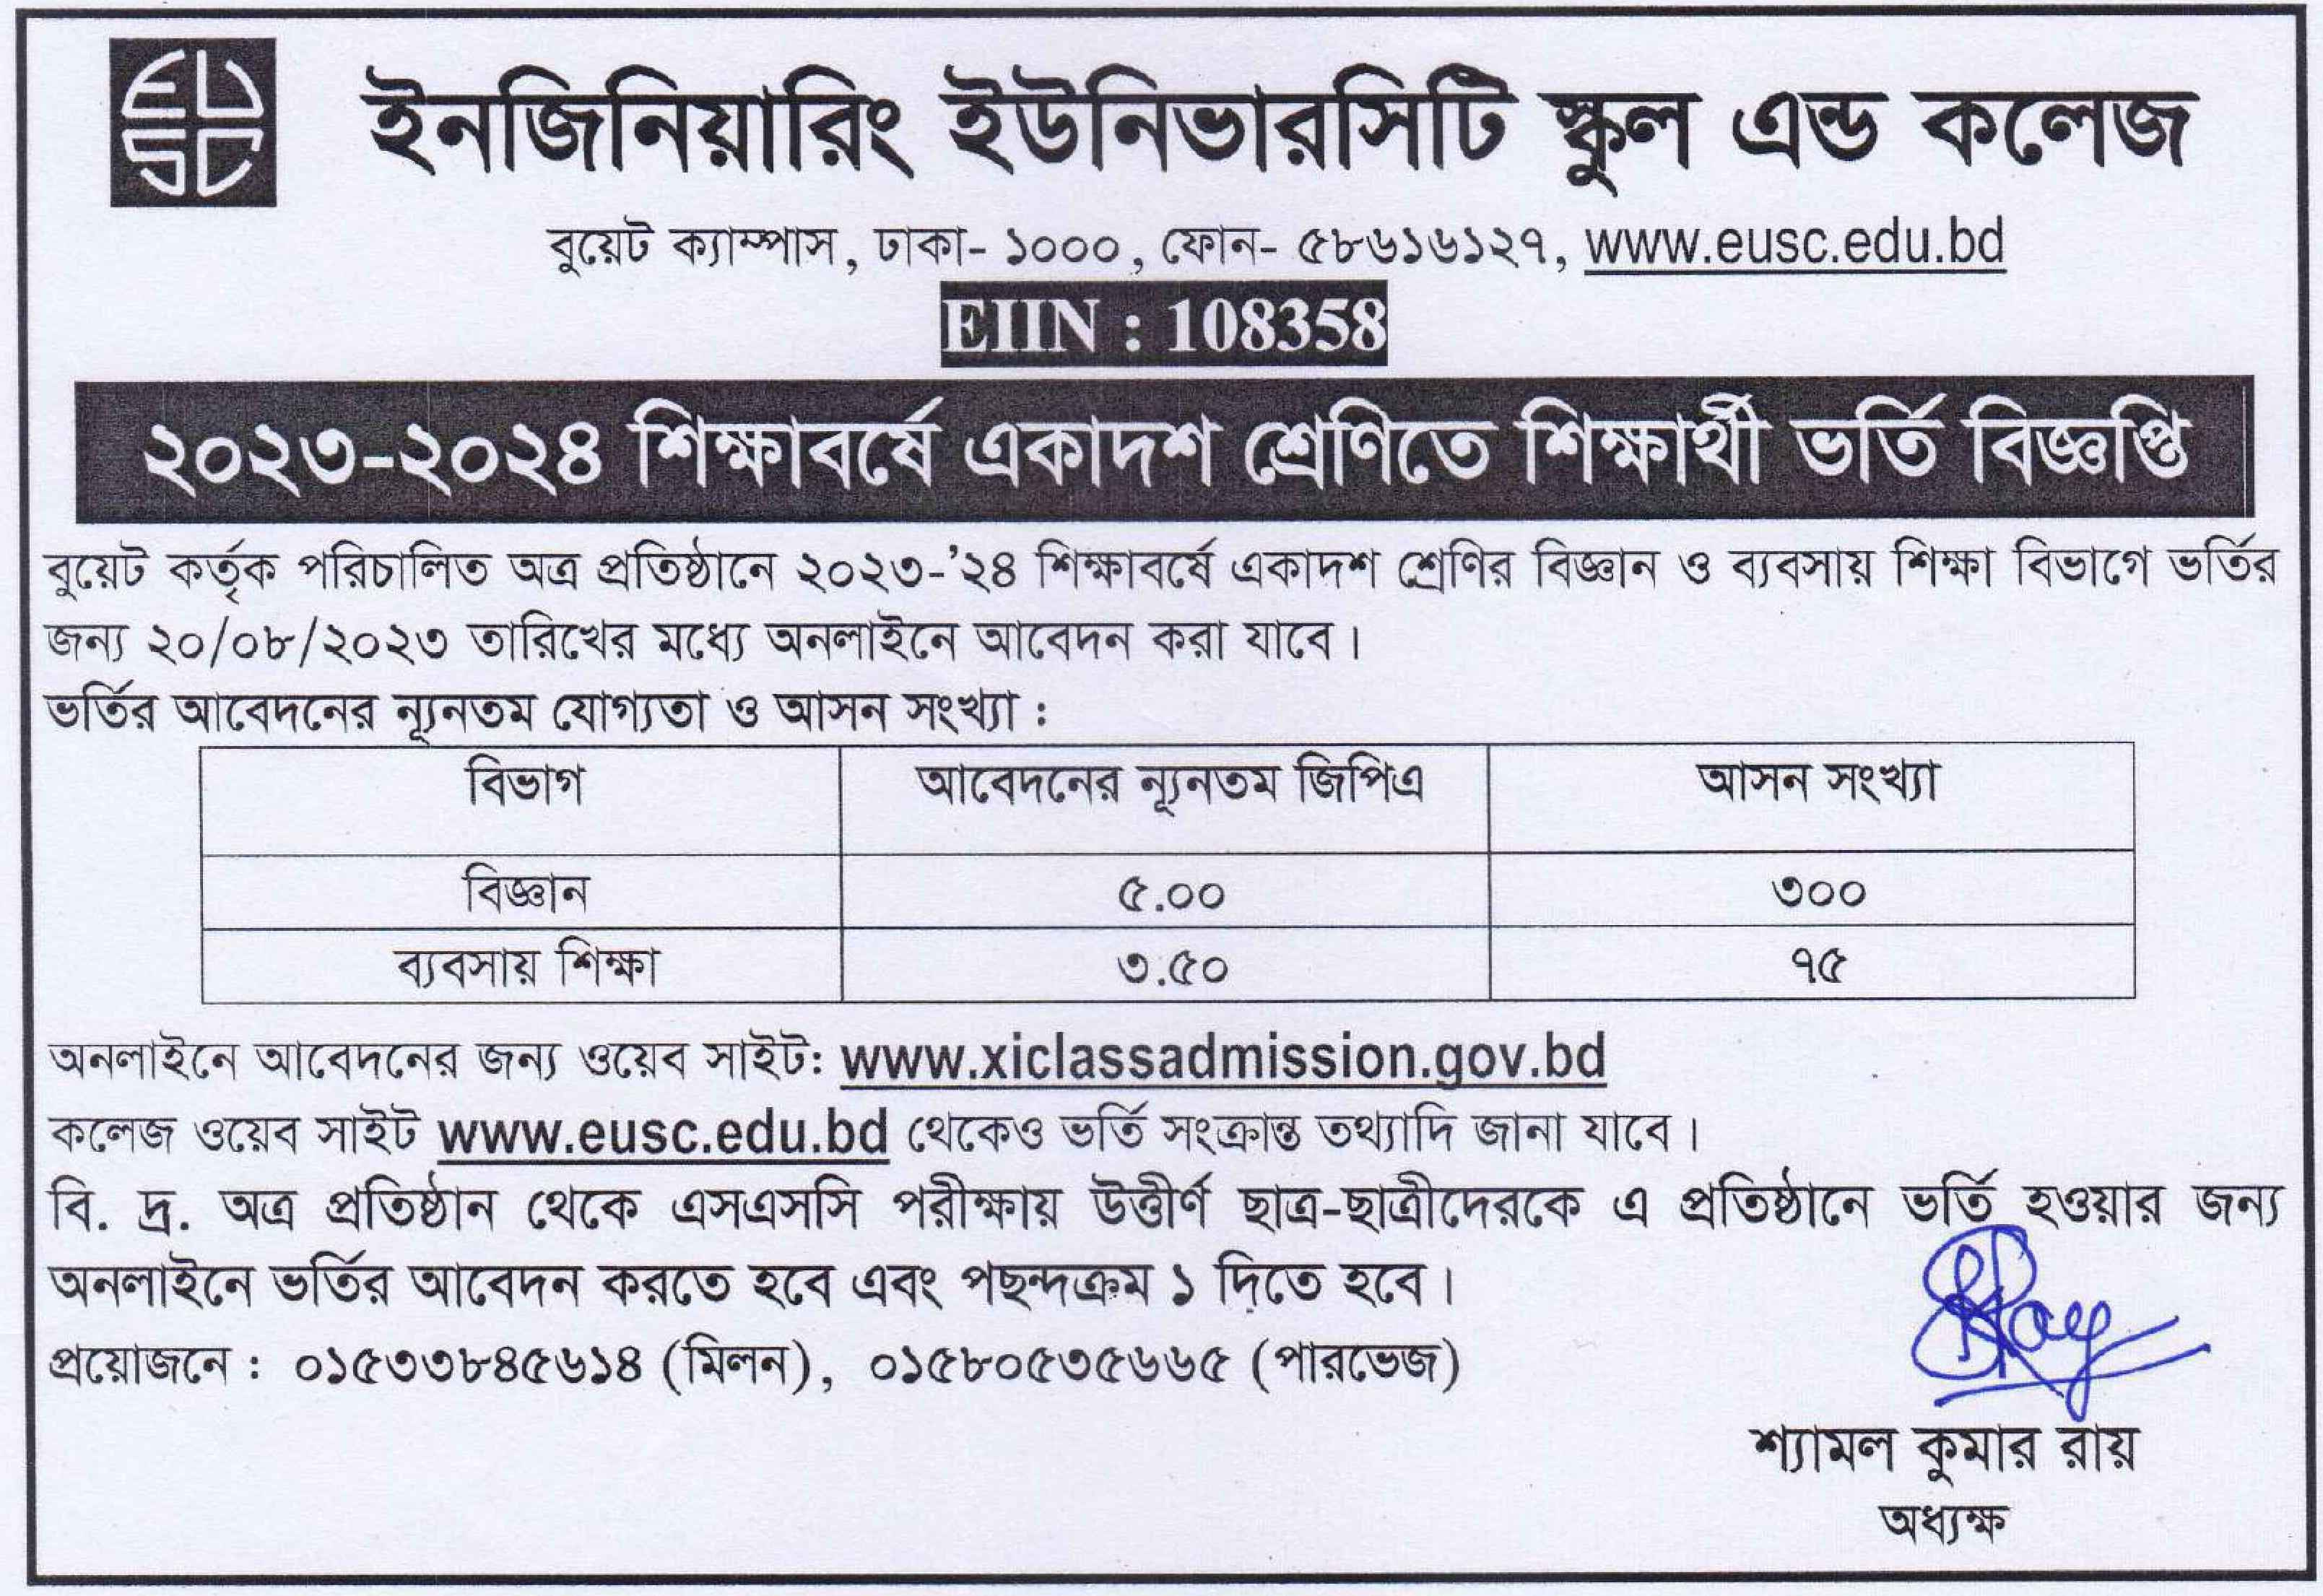 Engineering University School and College Admission Notice